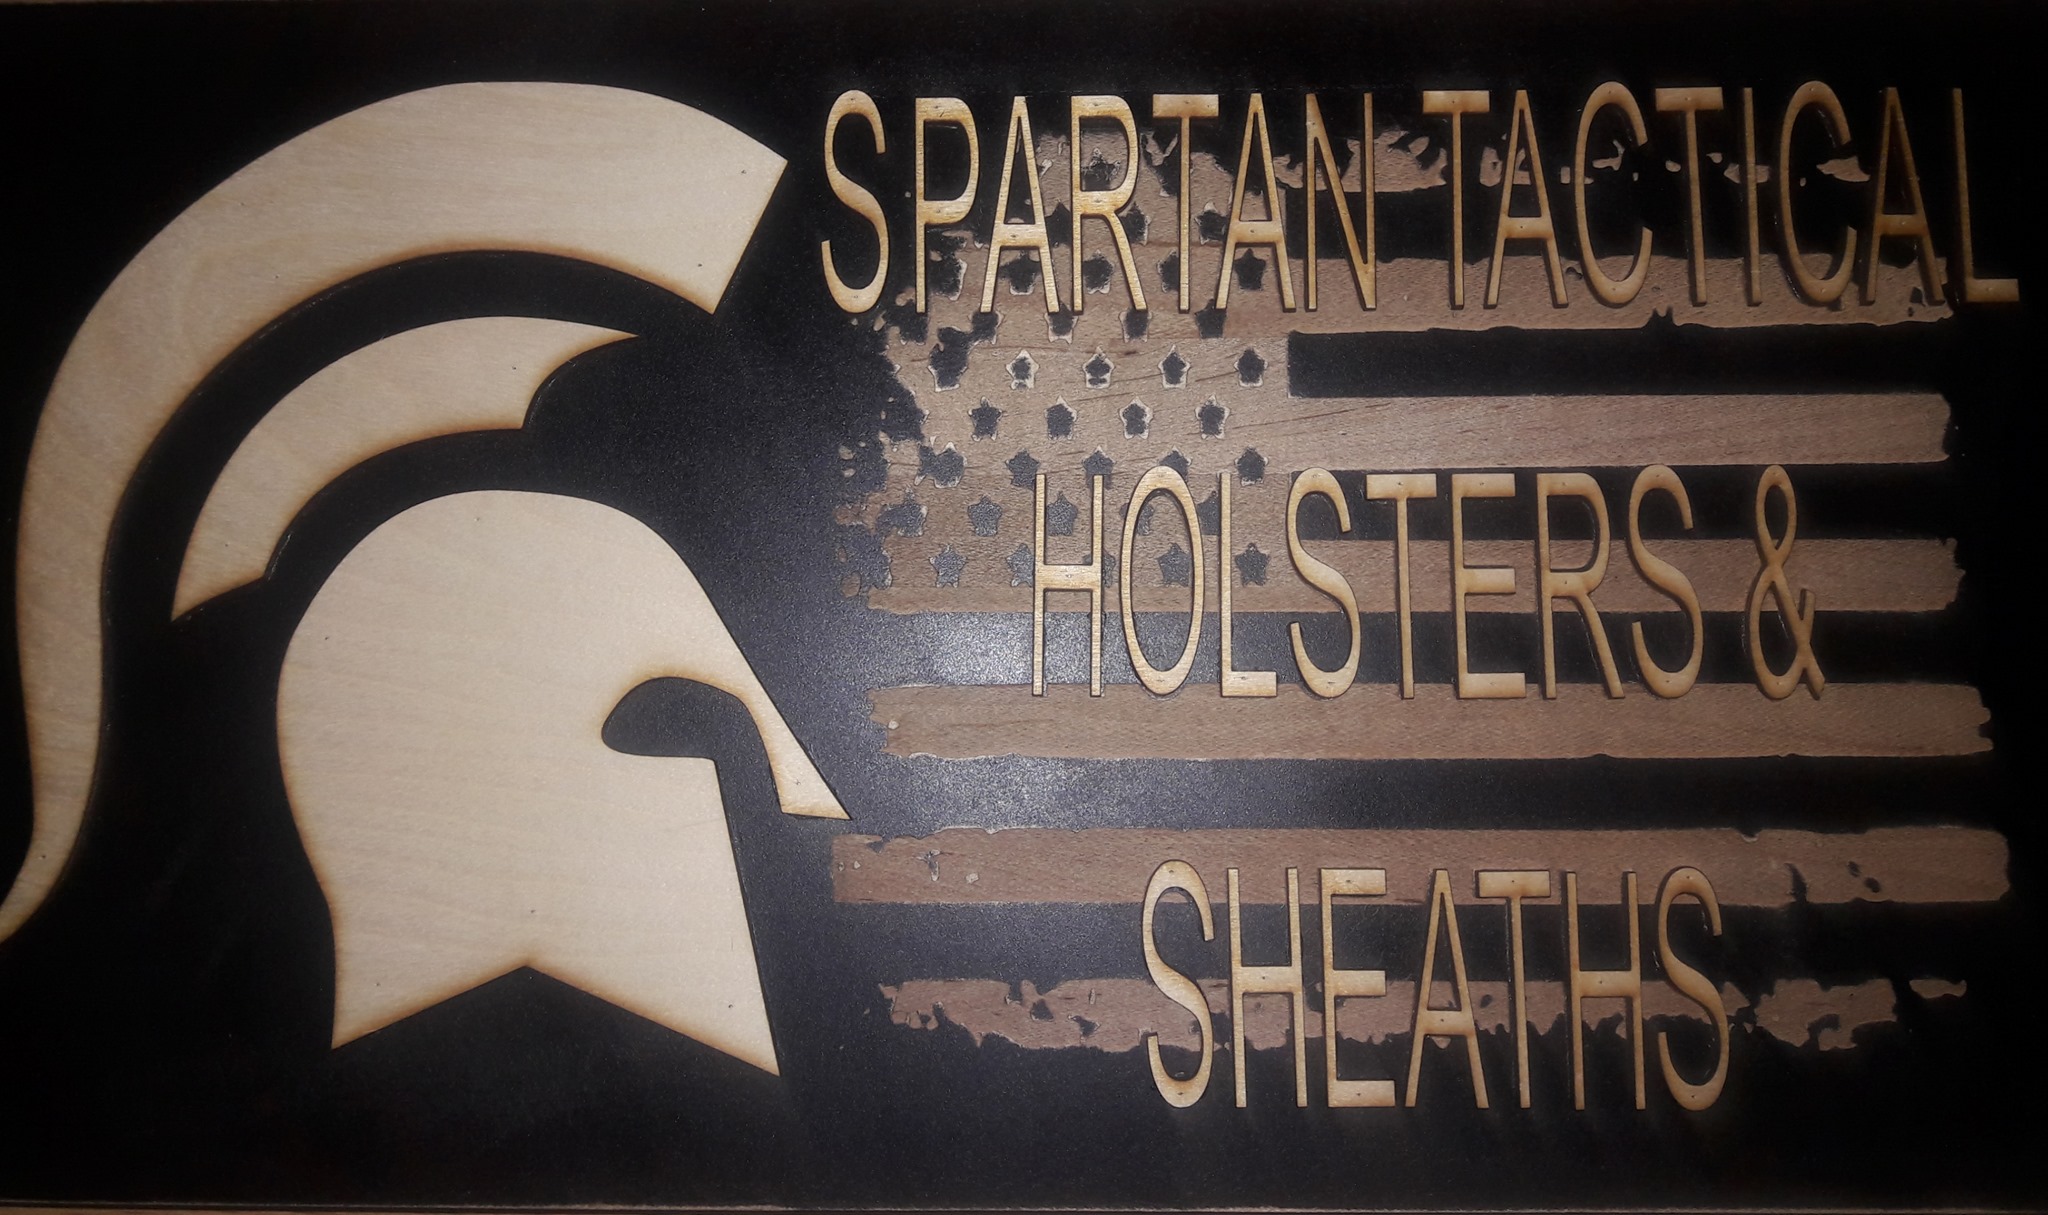 Spartan Tactical holsters